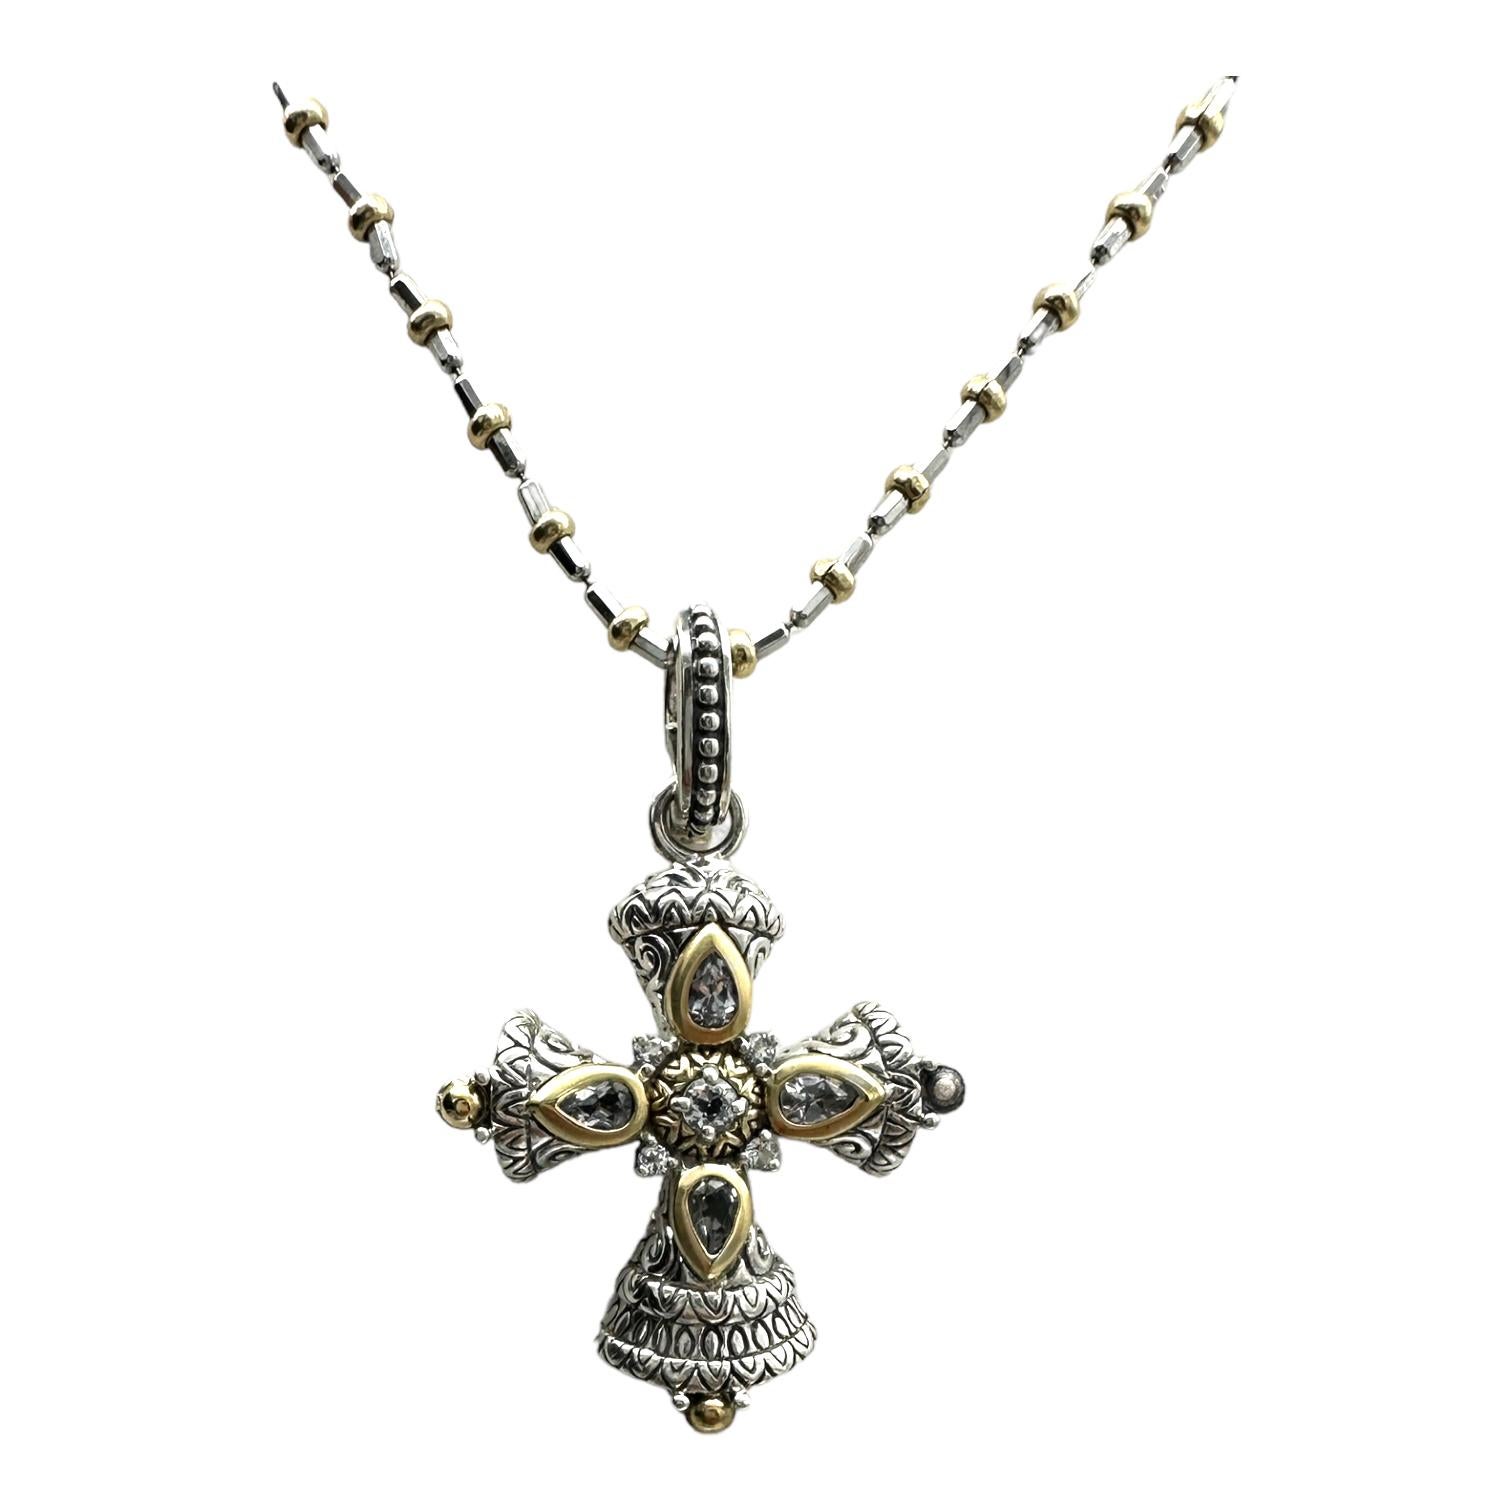 18 Karat Yellow Gold Cross with Sterling. White stones are set in bezels of 18 Karat gold.

The measurements of the cross are 1-3/4” in length, including the ornate .50